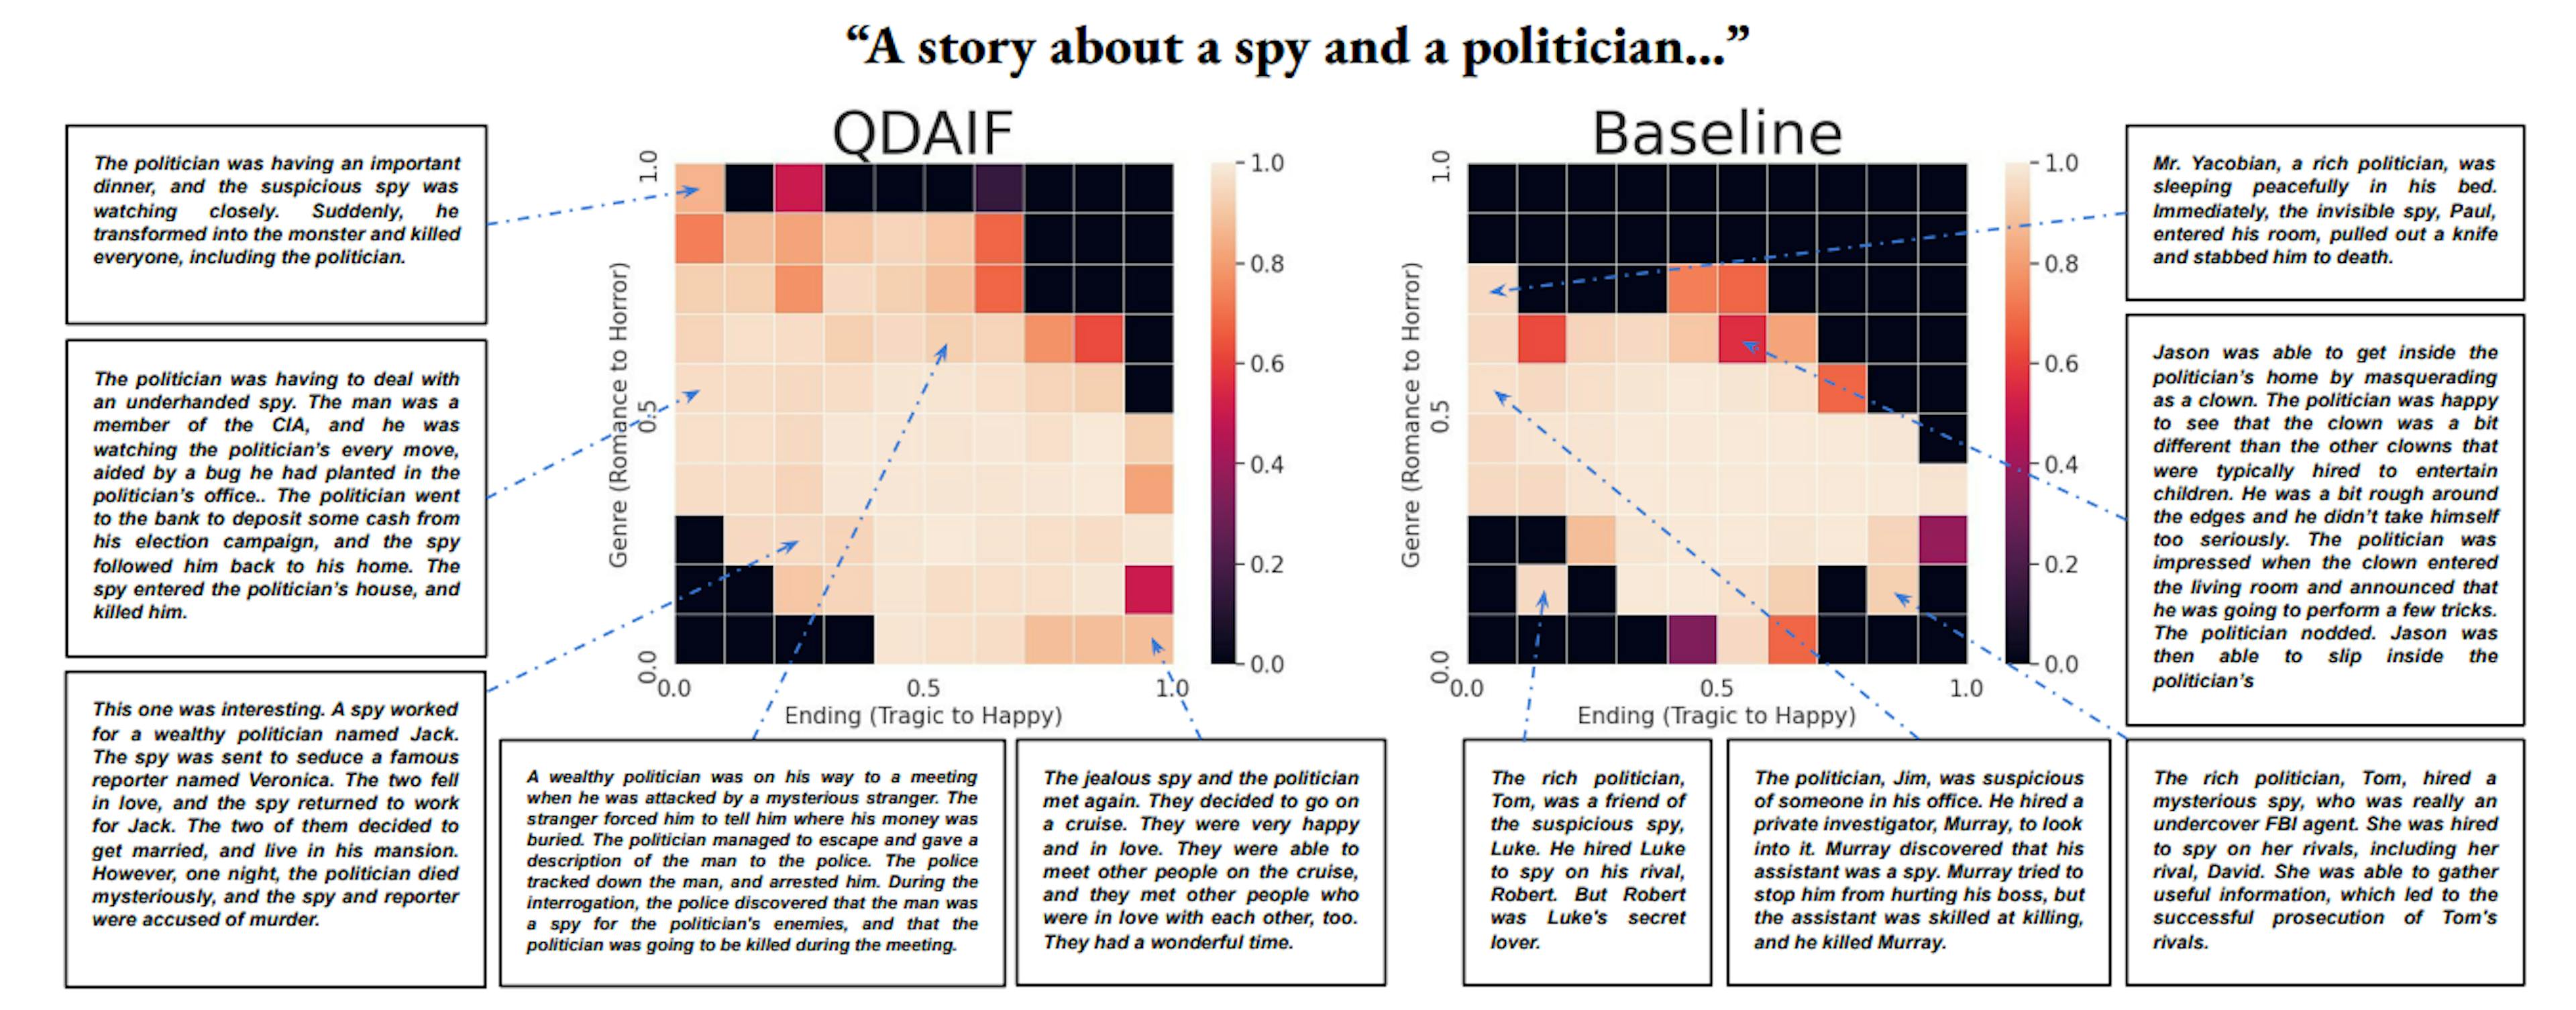 Figure 1: QDAIF (left) covers more the search space with diverse, high-quality stories compared to the baseline (right). The baseline is LMX, Quality-Only (Meyerson et al., 2023), which optimizes only for the quality of solutions. QDAIF discovered more interesting stories about a spy and a politician, covering examples such as romance stories with a happy-ending, to horror stories with a tragic-ending. The baseline produced a story (right-middle position, starting with "Jason") with a lower quality score due to the lack of a desired spy character (denoted by the red-colored bin, for a story with a neutral ending, and leaning to horror). QDAIF discovered a better, more-relevant story (bottom-middle position, starting with "a wealthy politician") for this same neutral bin.